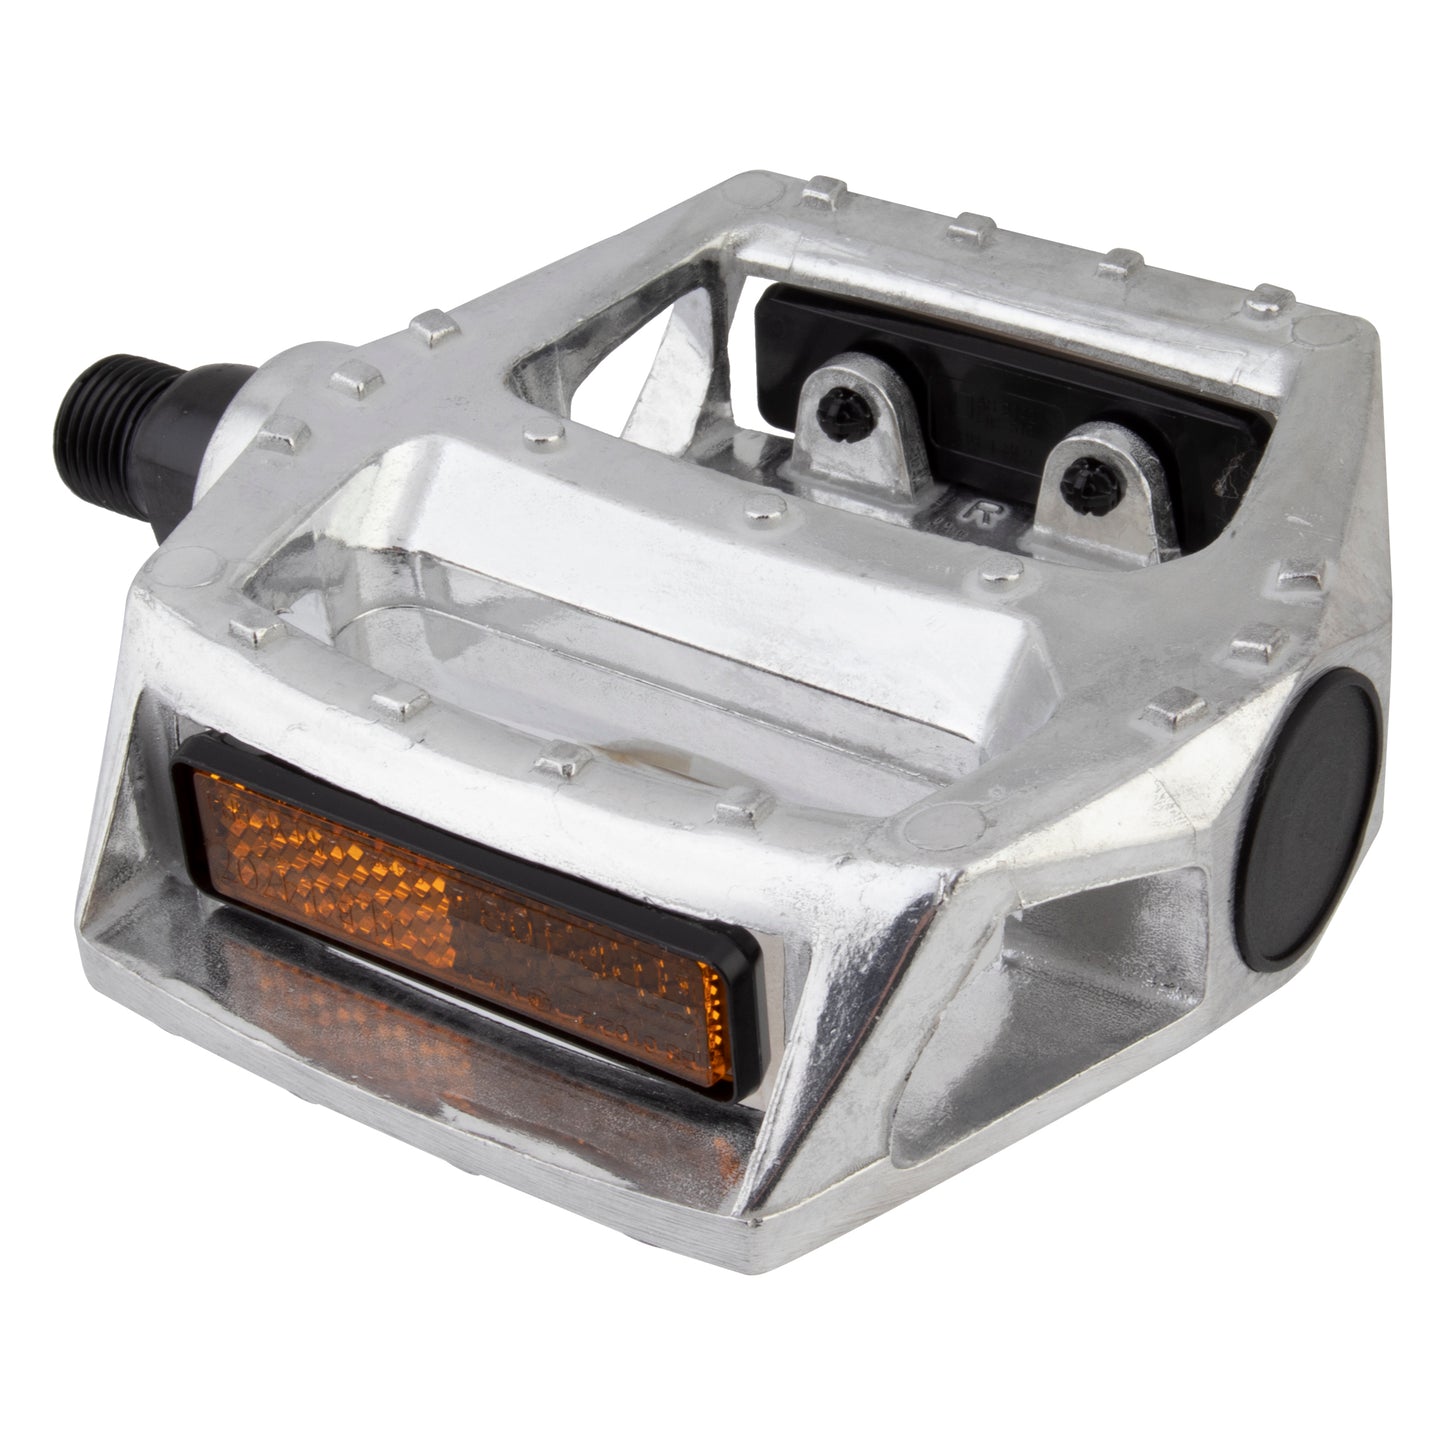 Sunlite MX Alloy Bicycle Pedals SVR